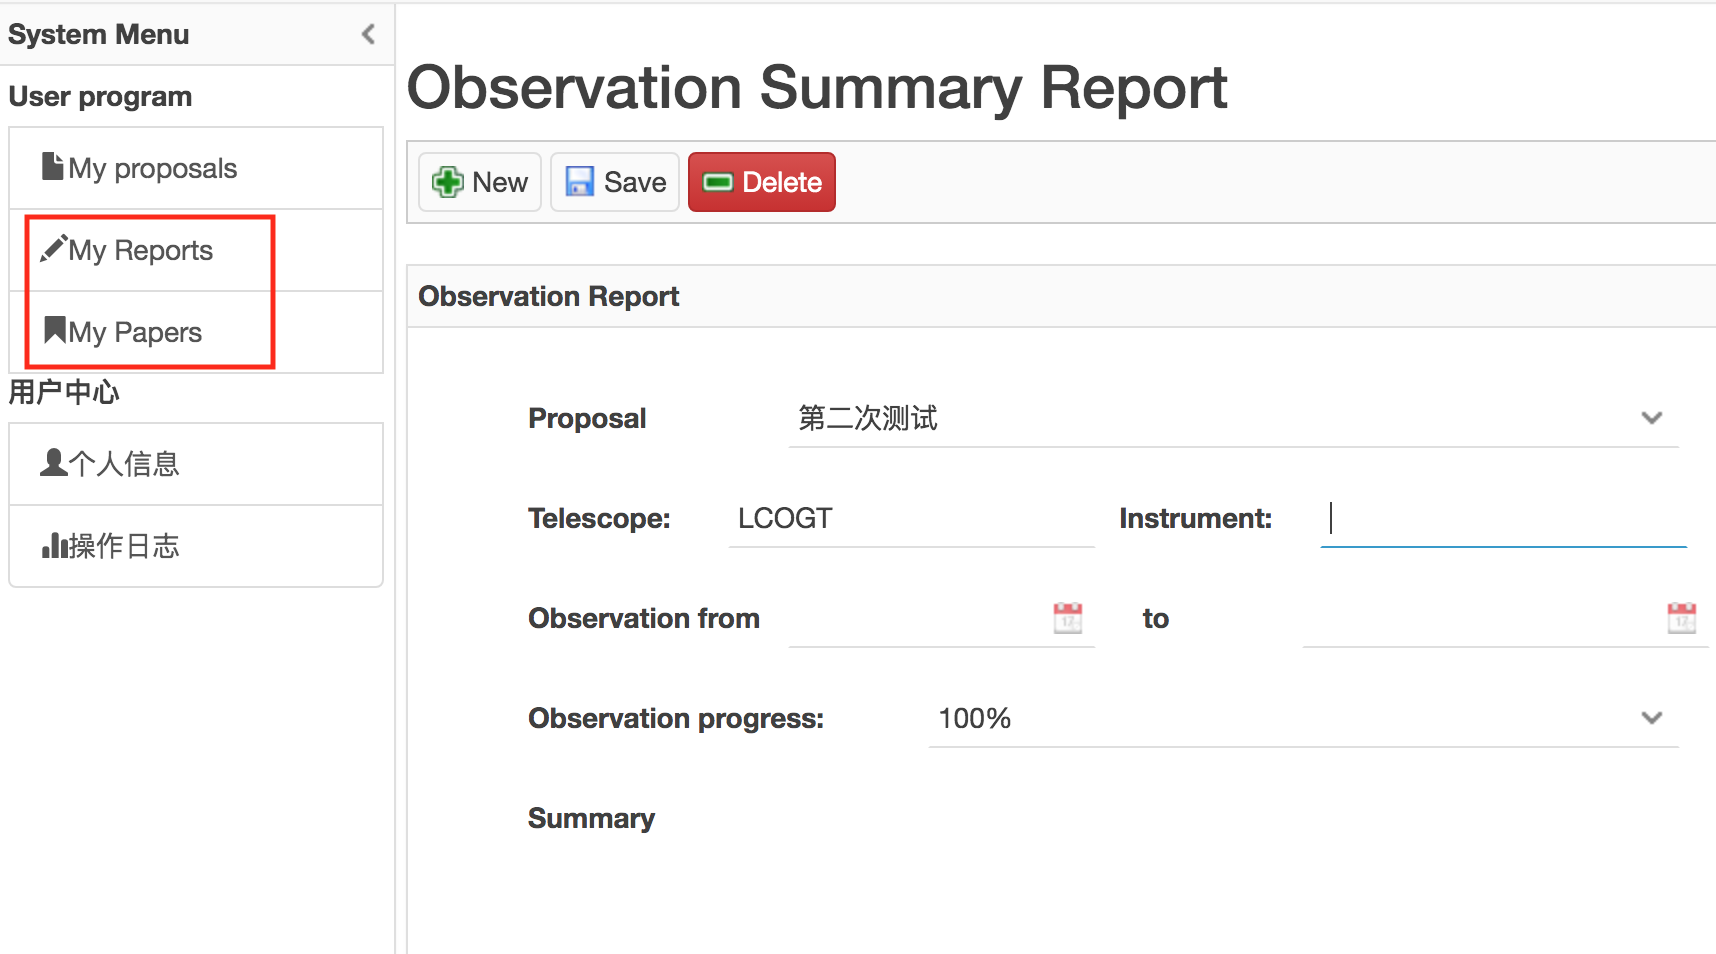 upload observation report and publications